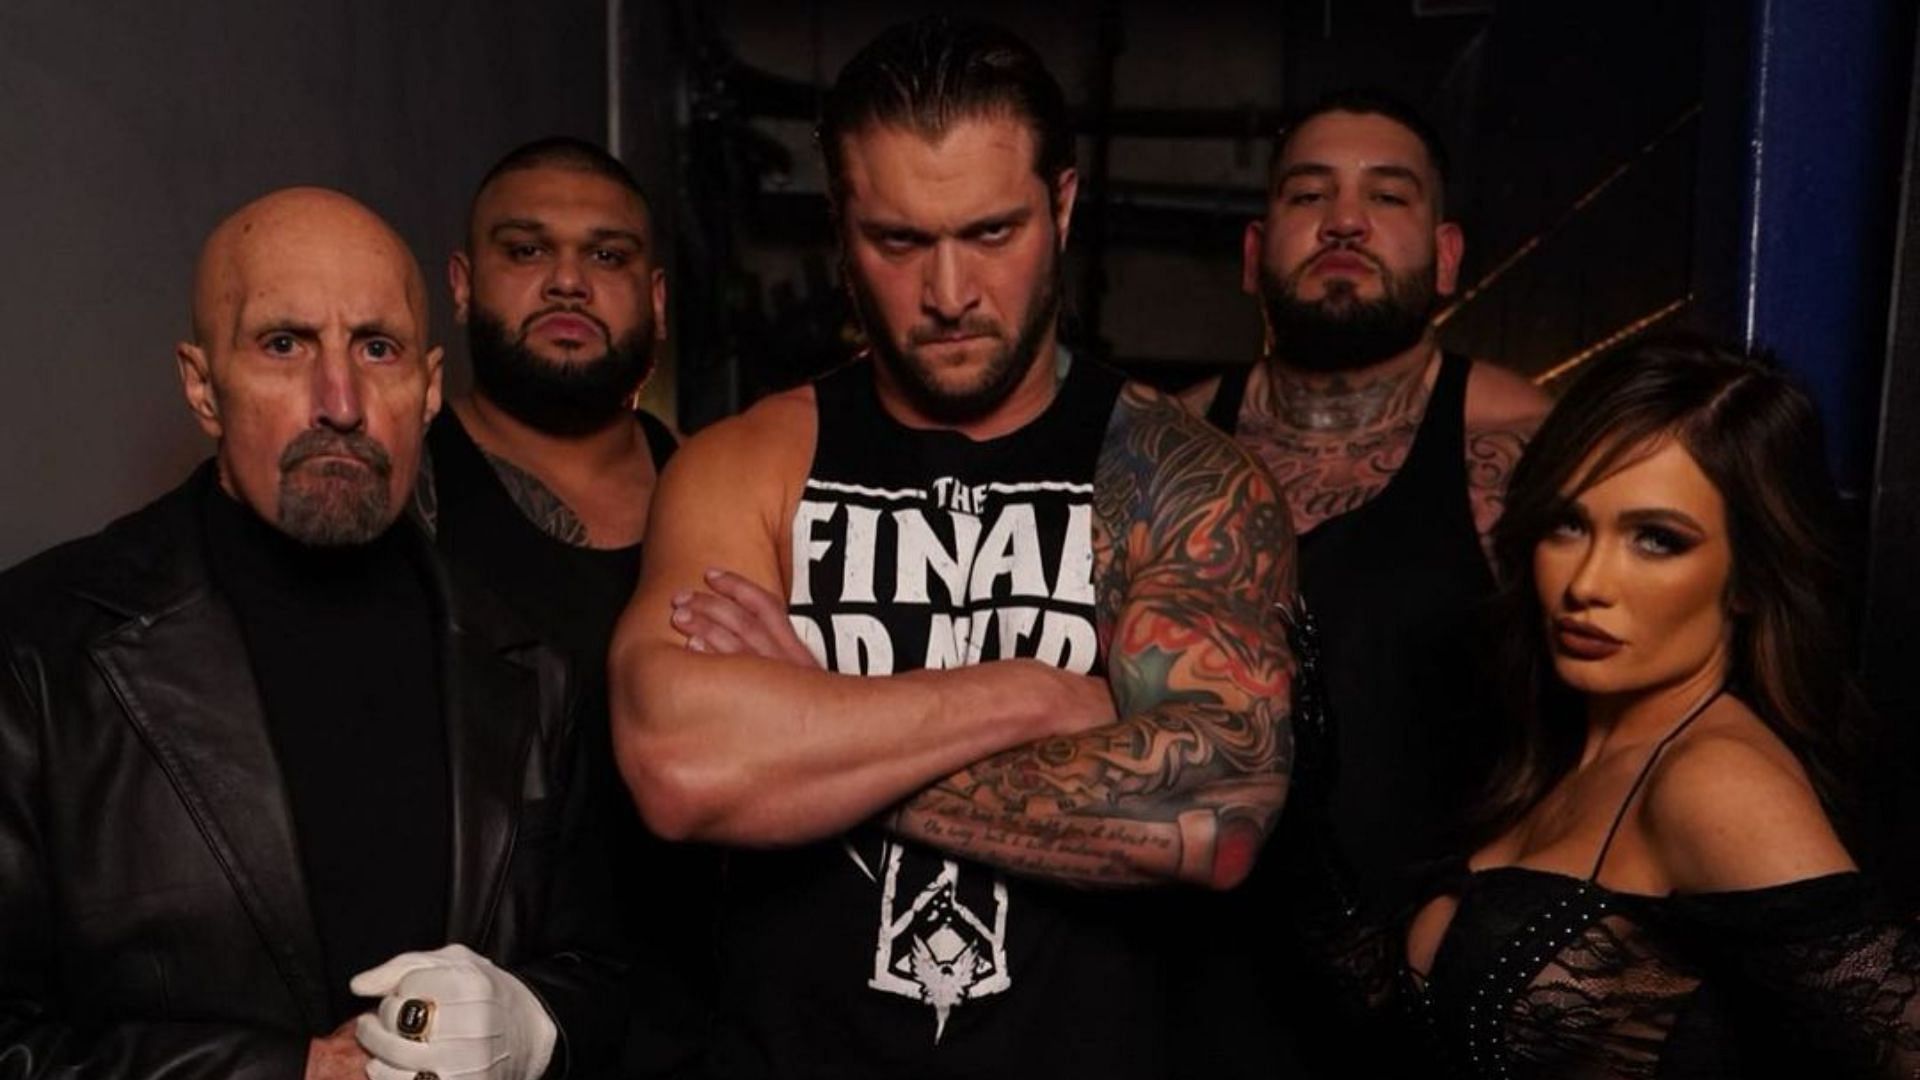 The Final Testament in the newest WWE faction on SmackDown.